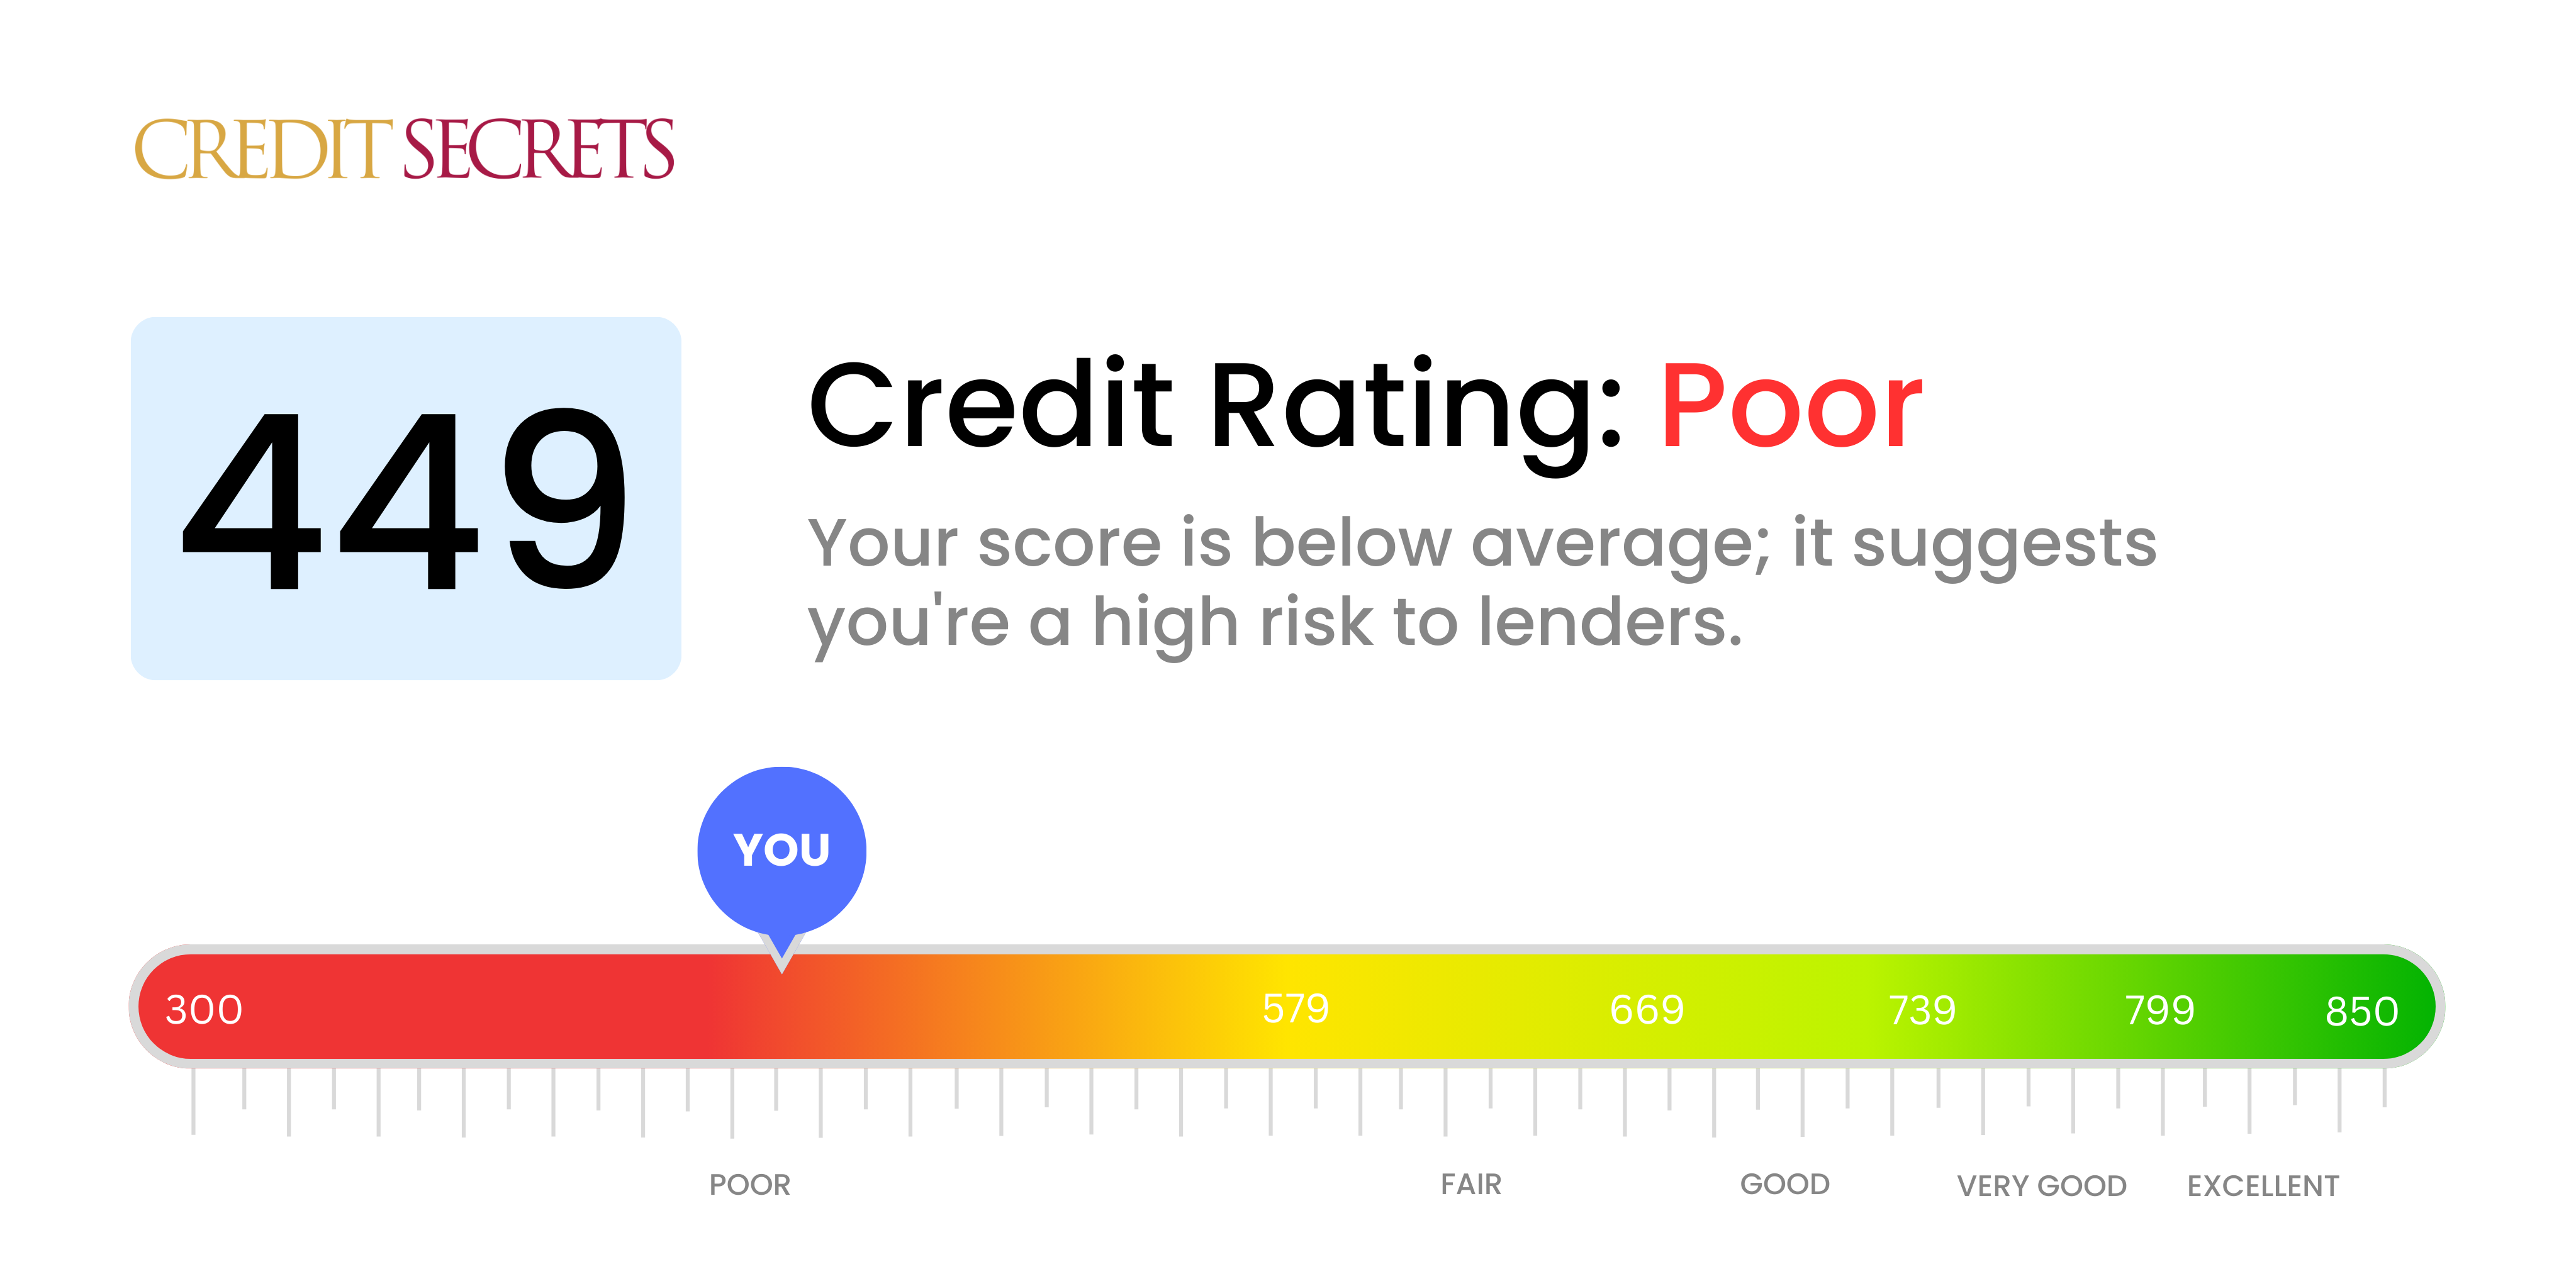 Is 449 a good credit score?